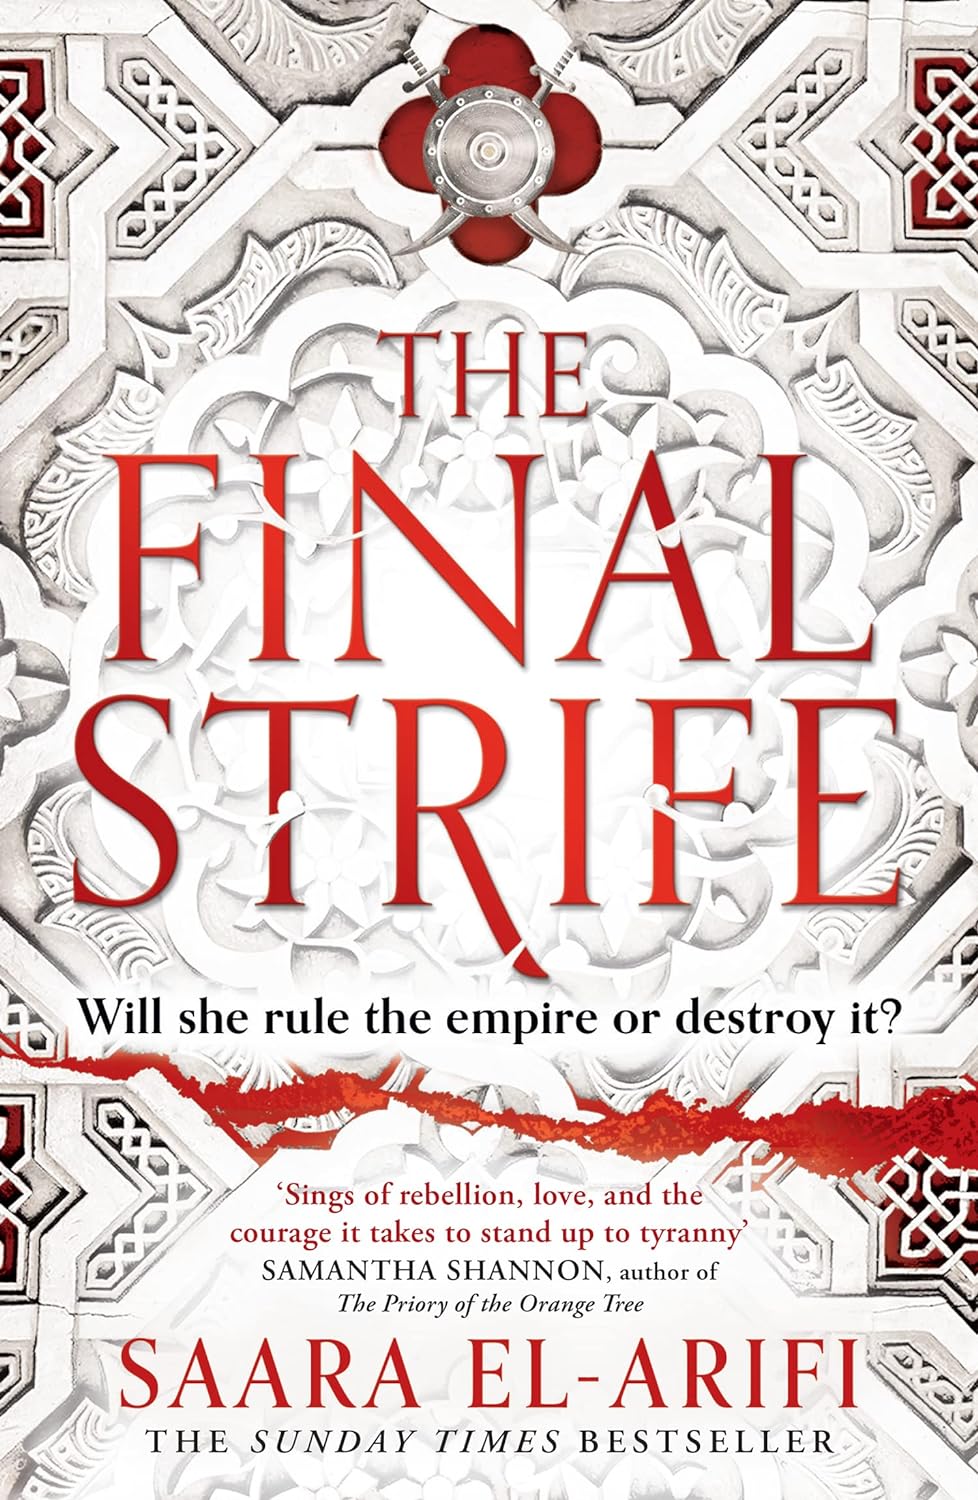 The white book cover for The Final Strife shows a wall with Celtic carvings. A shield with two swords behind it hangs at the top of the cover. Black text reads "Will she rule the empire or destroy it?"